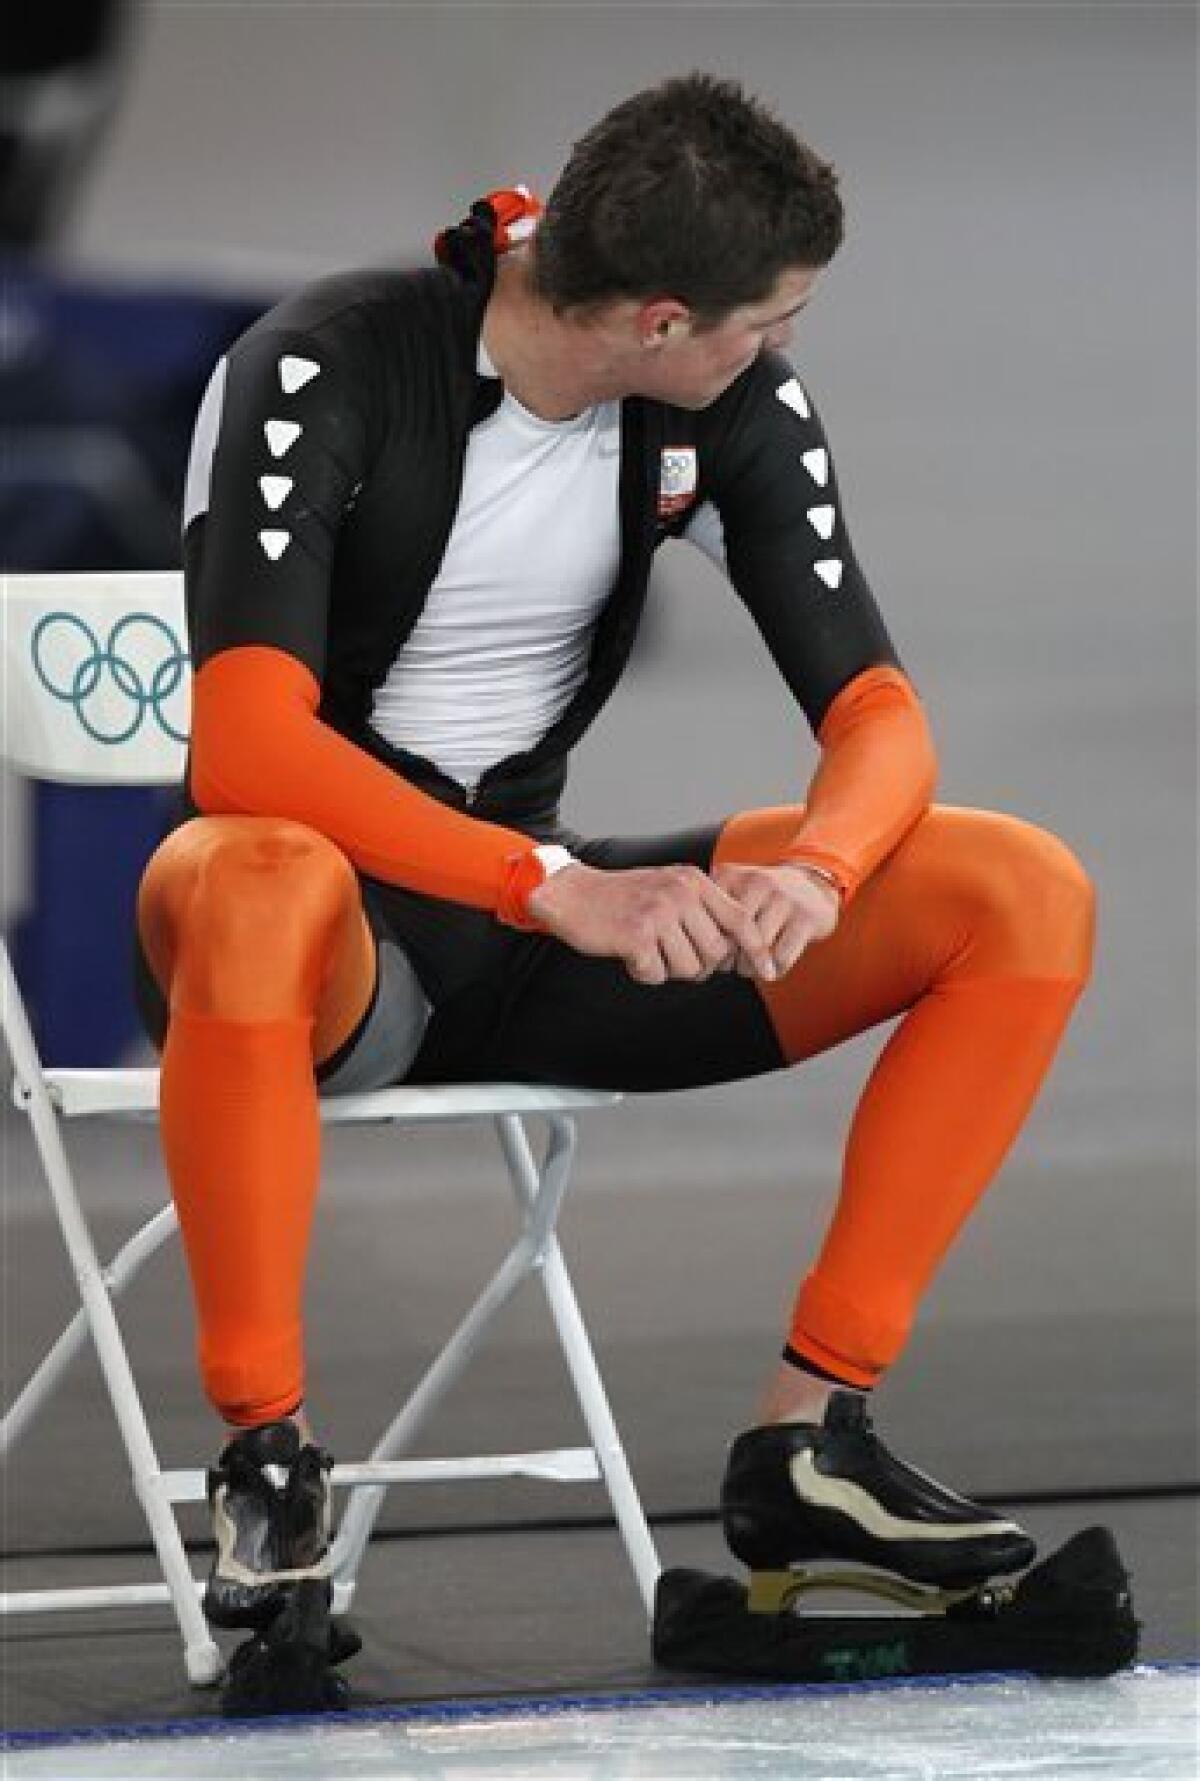 Netherlands's Sven Kramer reacts after he was disqualified during the men's 10,000 meter speed skating race at the Richmond Olympic Oval at the Vancouver 2010 Olympics in Vancouver, British Columbia, Tuesday, Feb. 23, 2010. Lee Seung-hoon of South Korea won a stunning gold medal in men's 10,000-meter speedskating Tuesday when overwhelming favorite Sven Kramer made an amateurish mistake, failing to switch lanes just past the midway point of the race, and was disqualified. (AP Photo/Kevin Frayer)